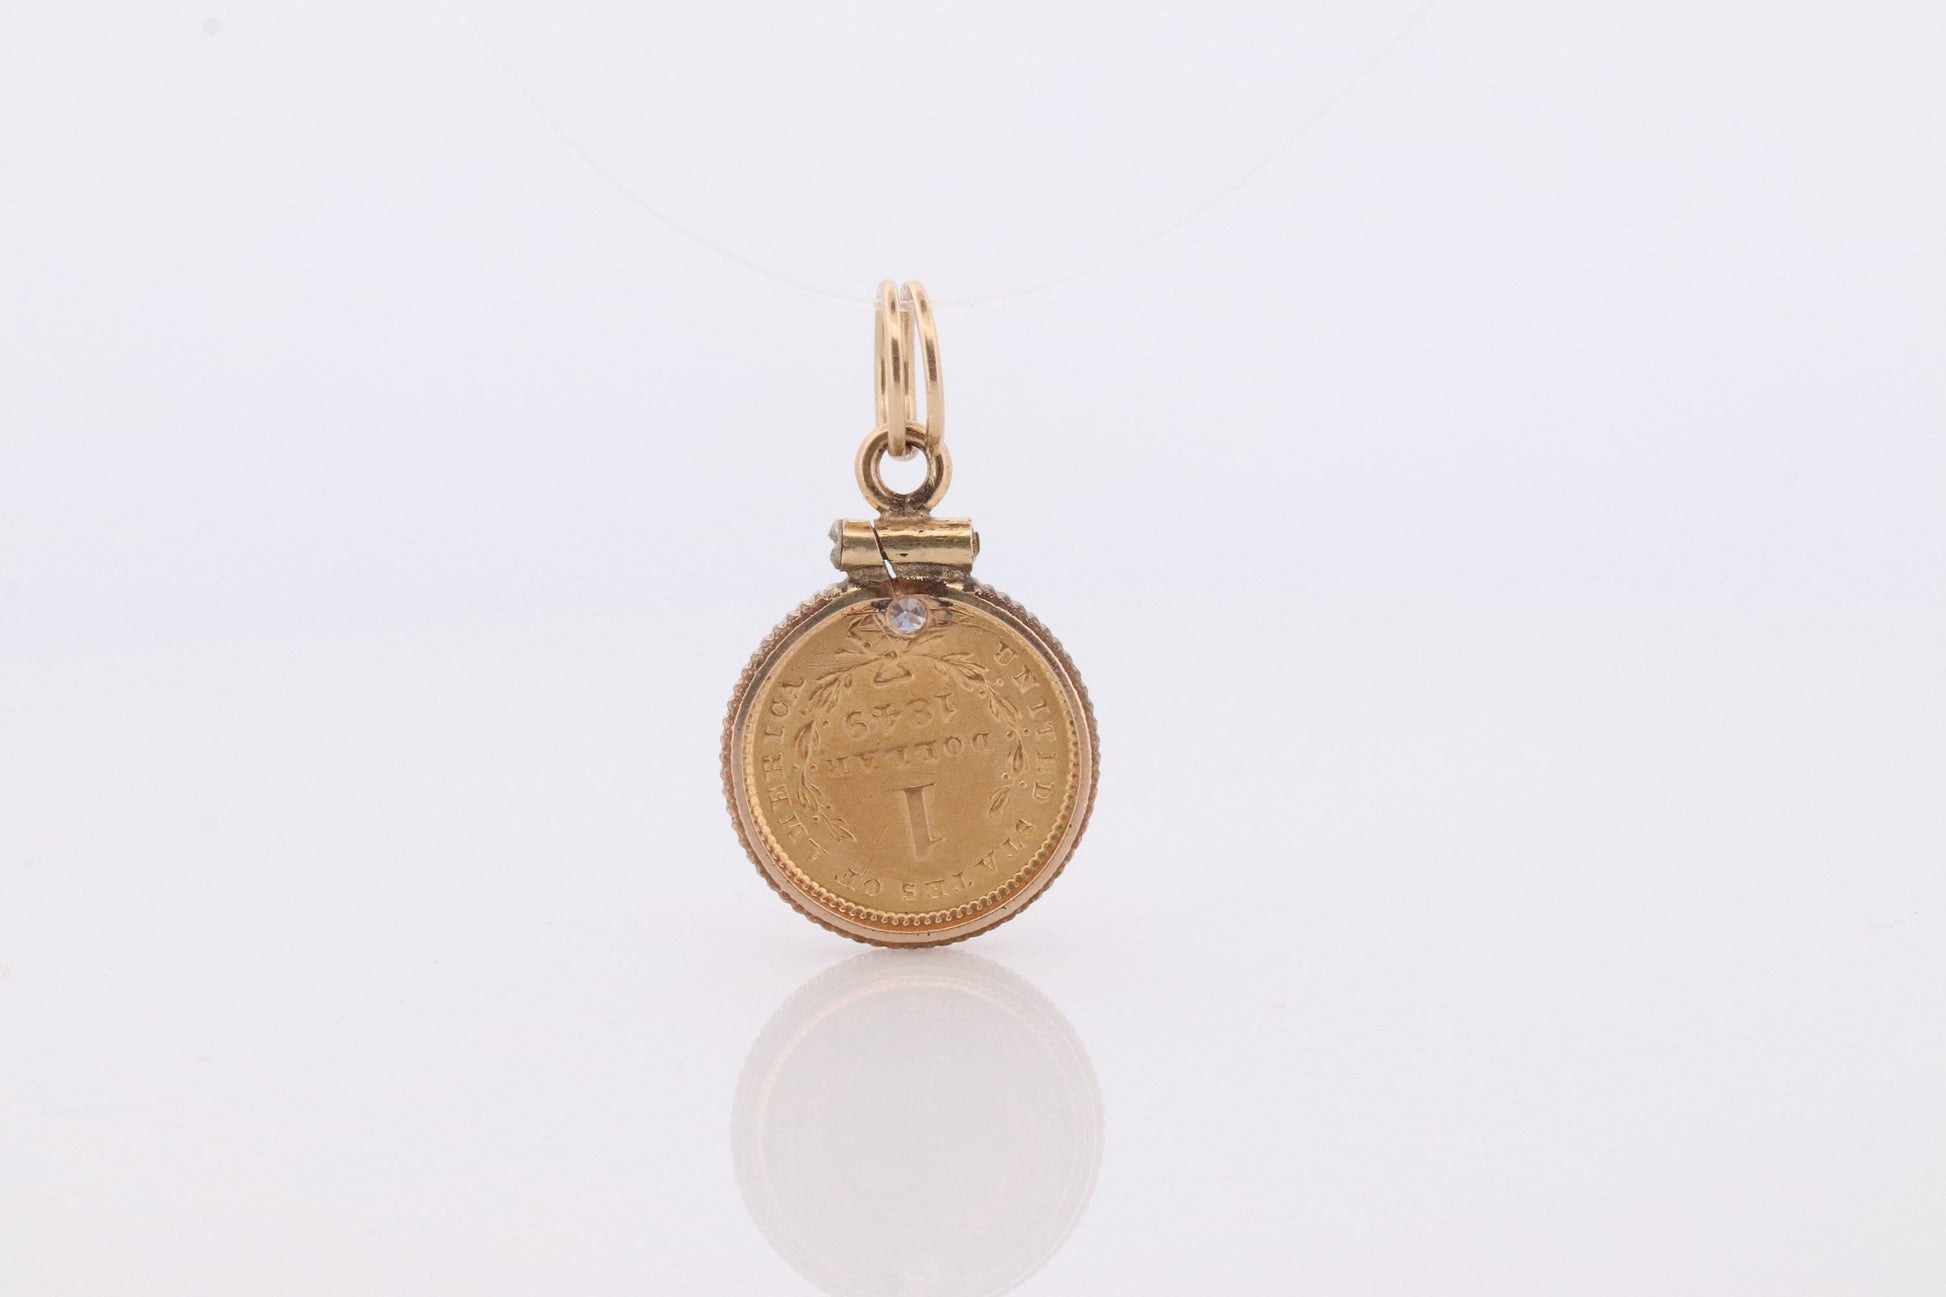 1849 US 1 dollar Liberty Head 900 gold 22K (21.6K) Gold coin set in a 14k yellow gold pendant or charm with a diamond.